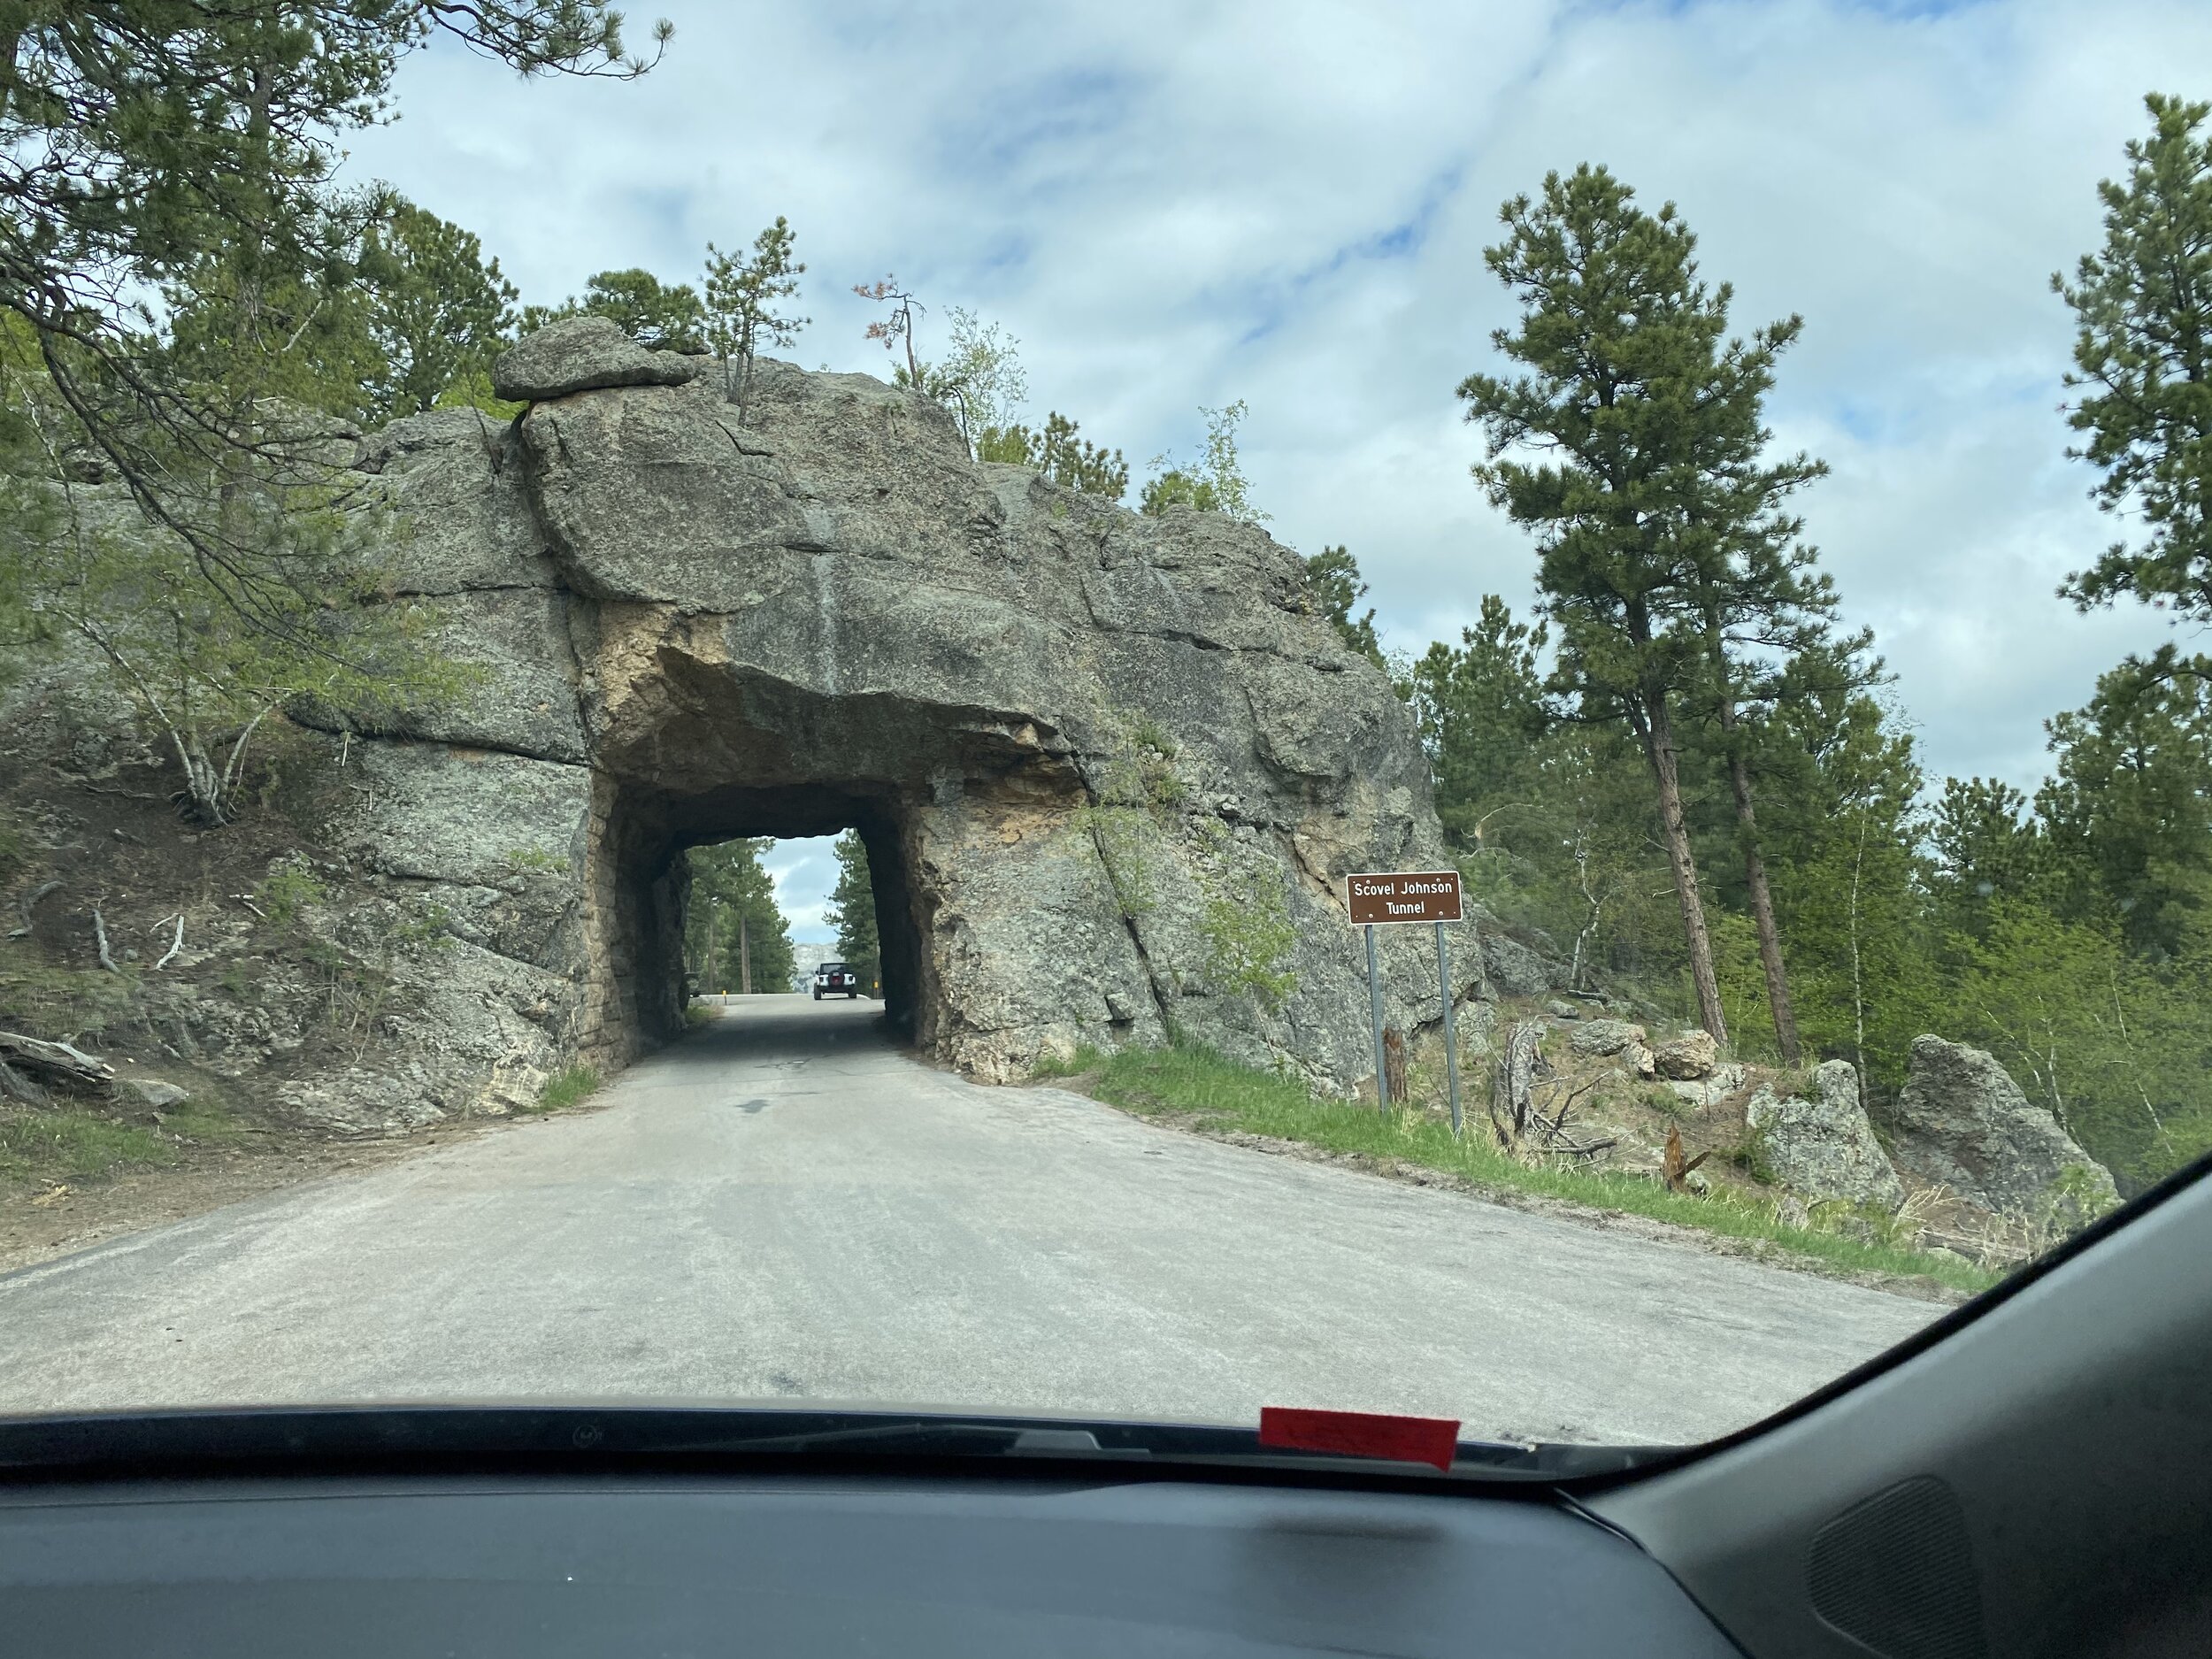 One of many neat (though narrow) tunnels that end up framing another new view of Mount Rushmore.  Photo by Karen Boudreaux, May 26, 2021